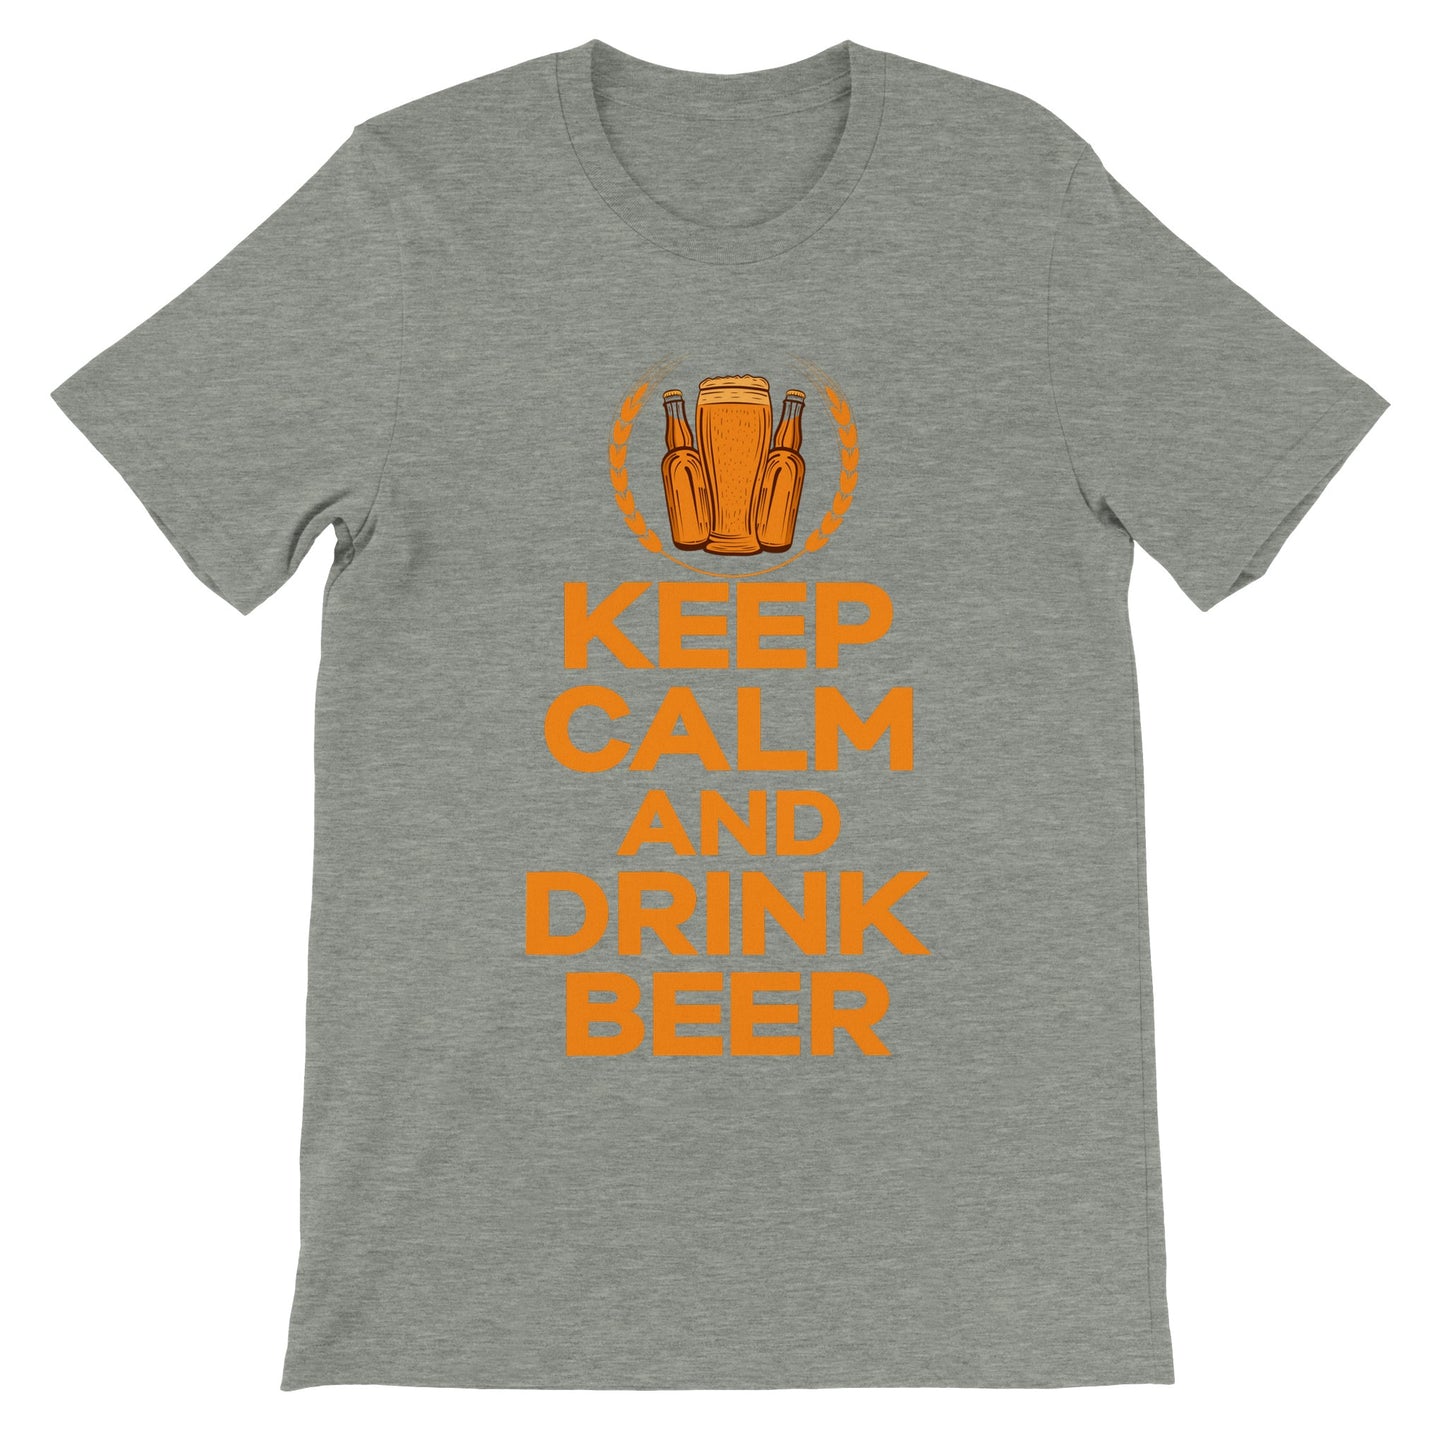 Funny T-Shirts - Keep Calm And Drink Beer - Premium Unisex T-Shirt 